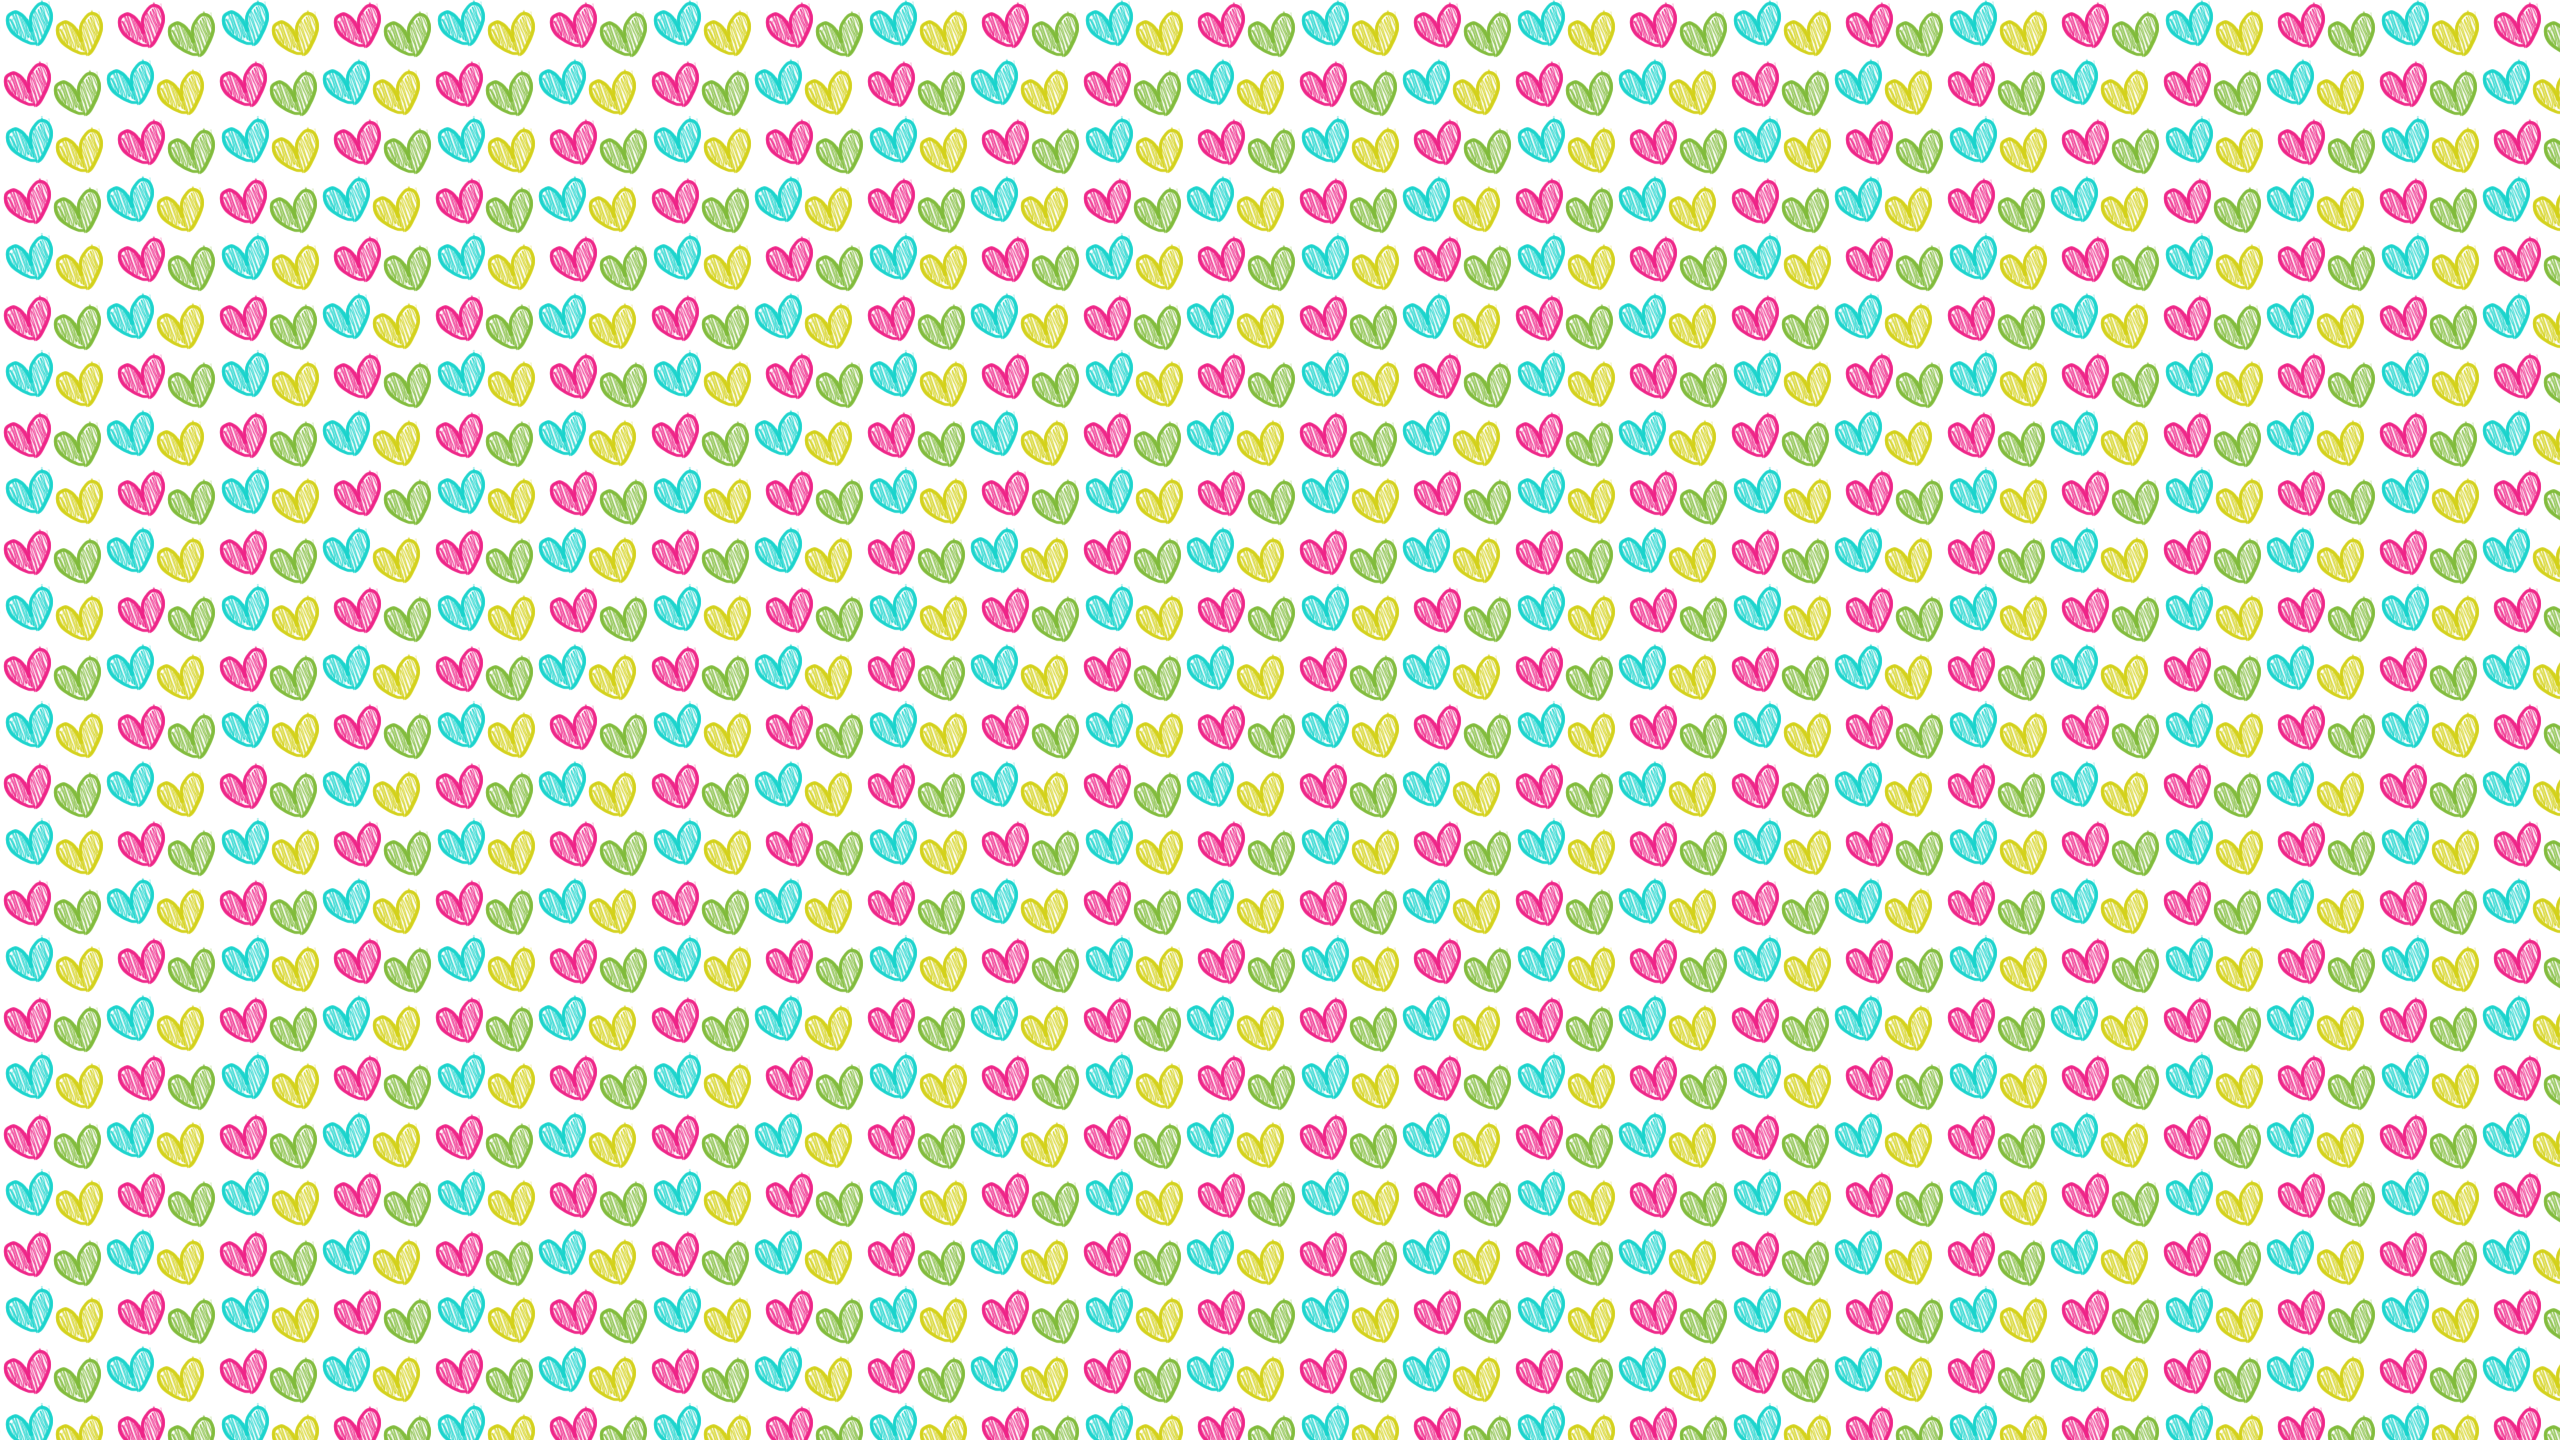 Hearts Of Crayon Desktop Wallpaper Is Easy Just Save The